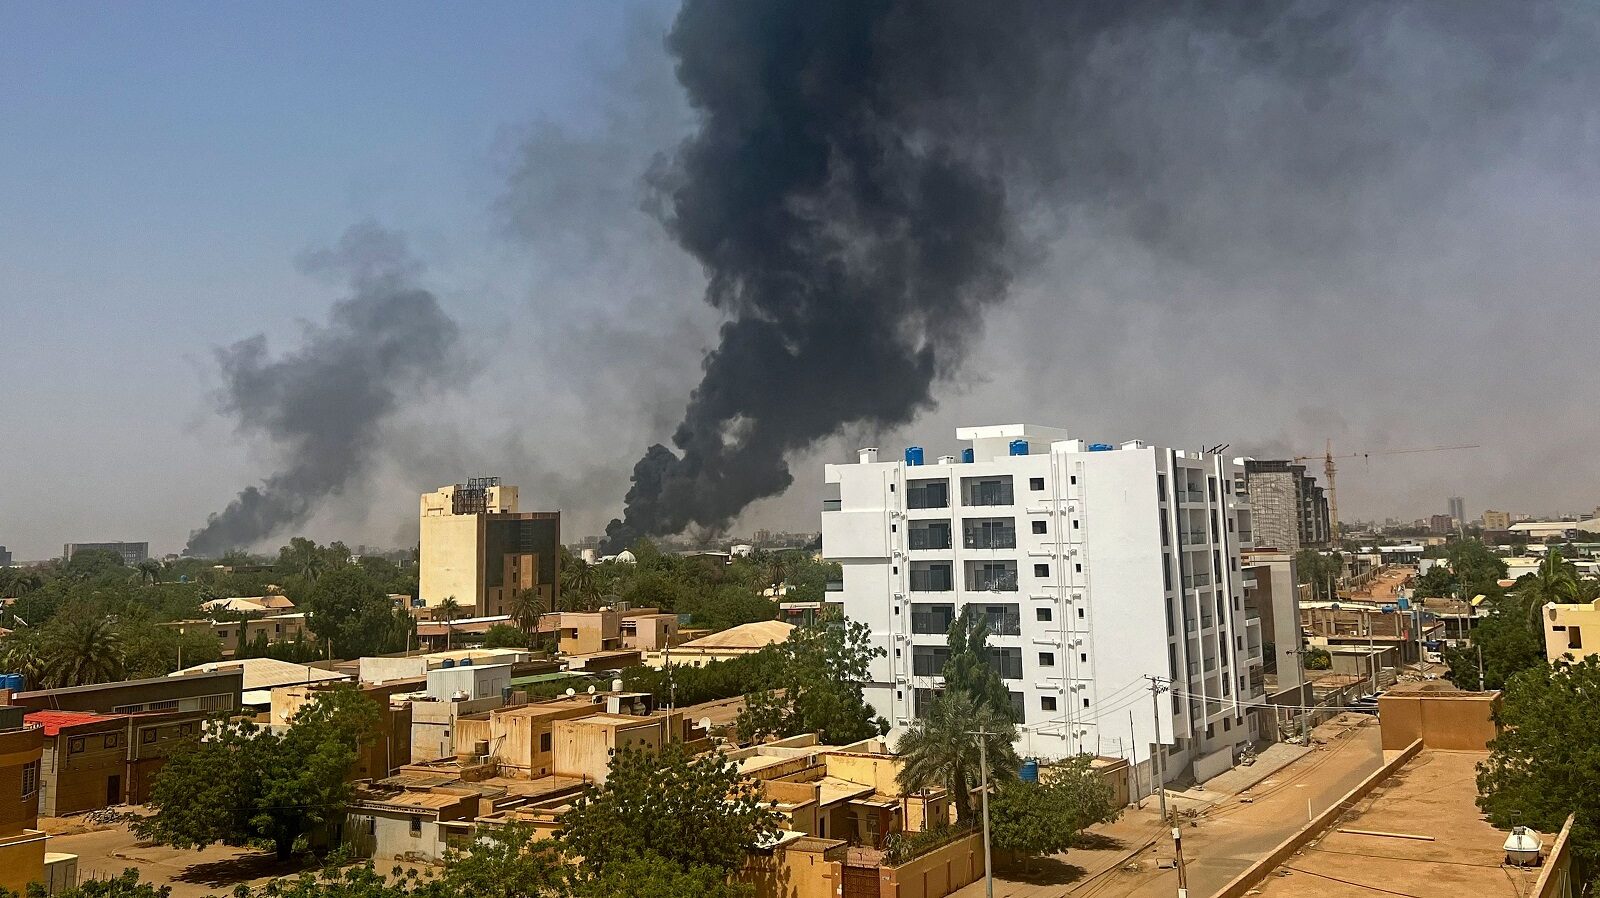 Sudan: Death Toll Reaches 97 as Military, Paramilitary Forces Battle for Control